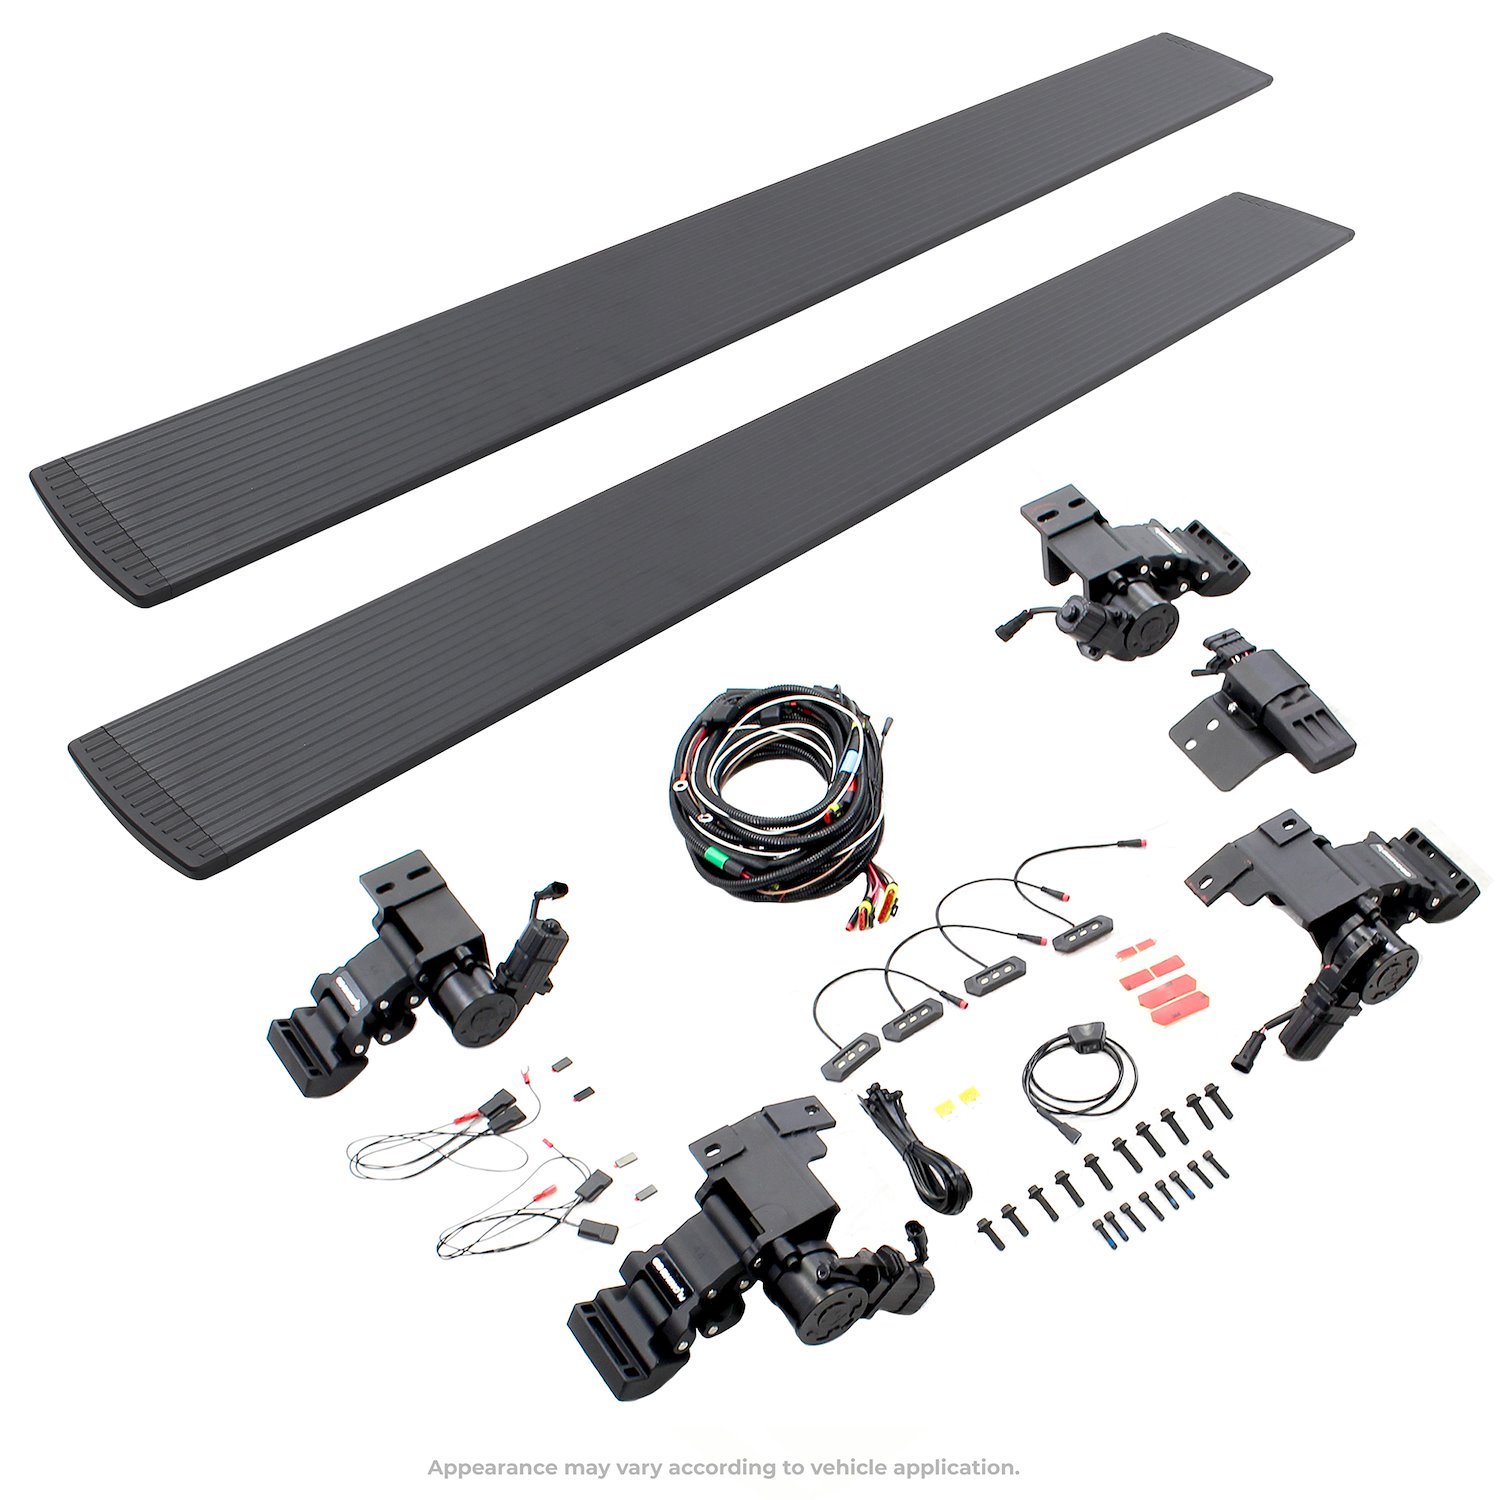 E1 Electric Running Board Kit Fits Select GMC Sierra 3500 HD Double Cab Pickup - Gasoline Only